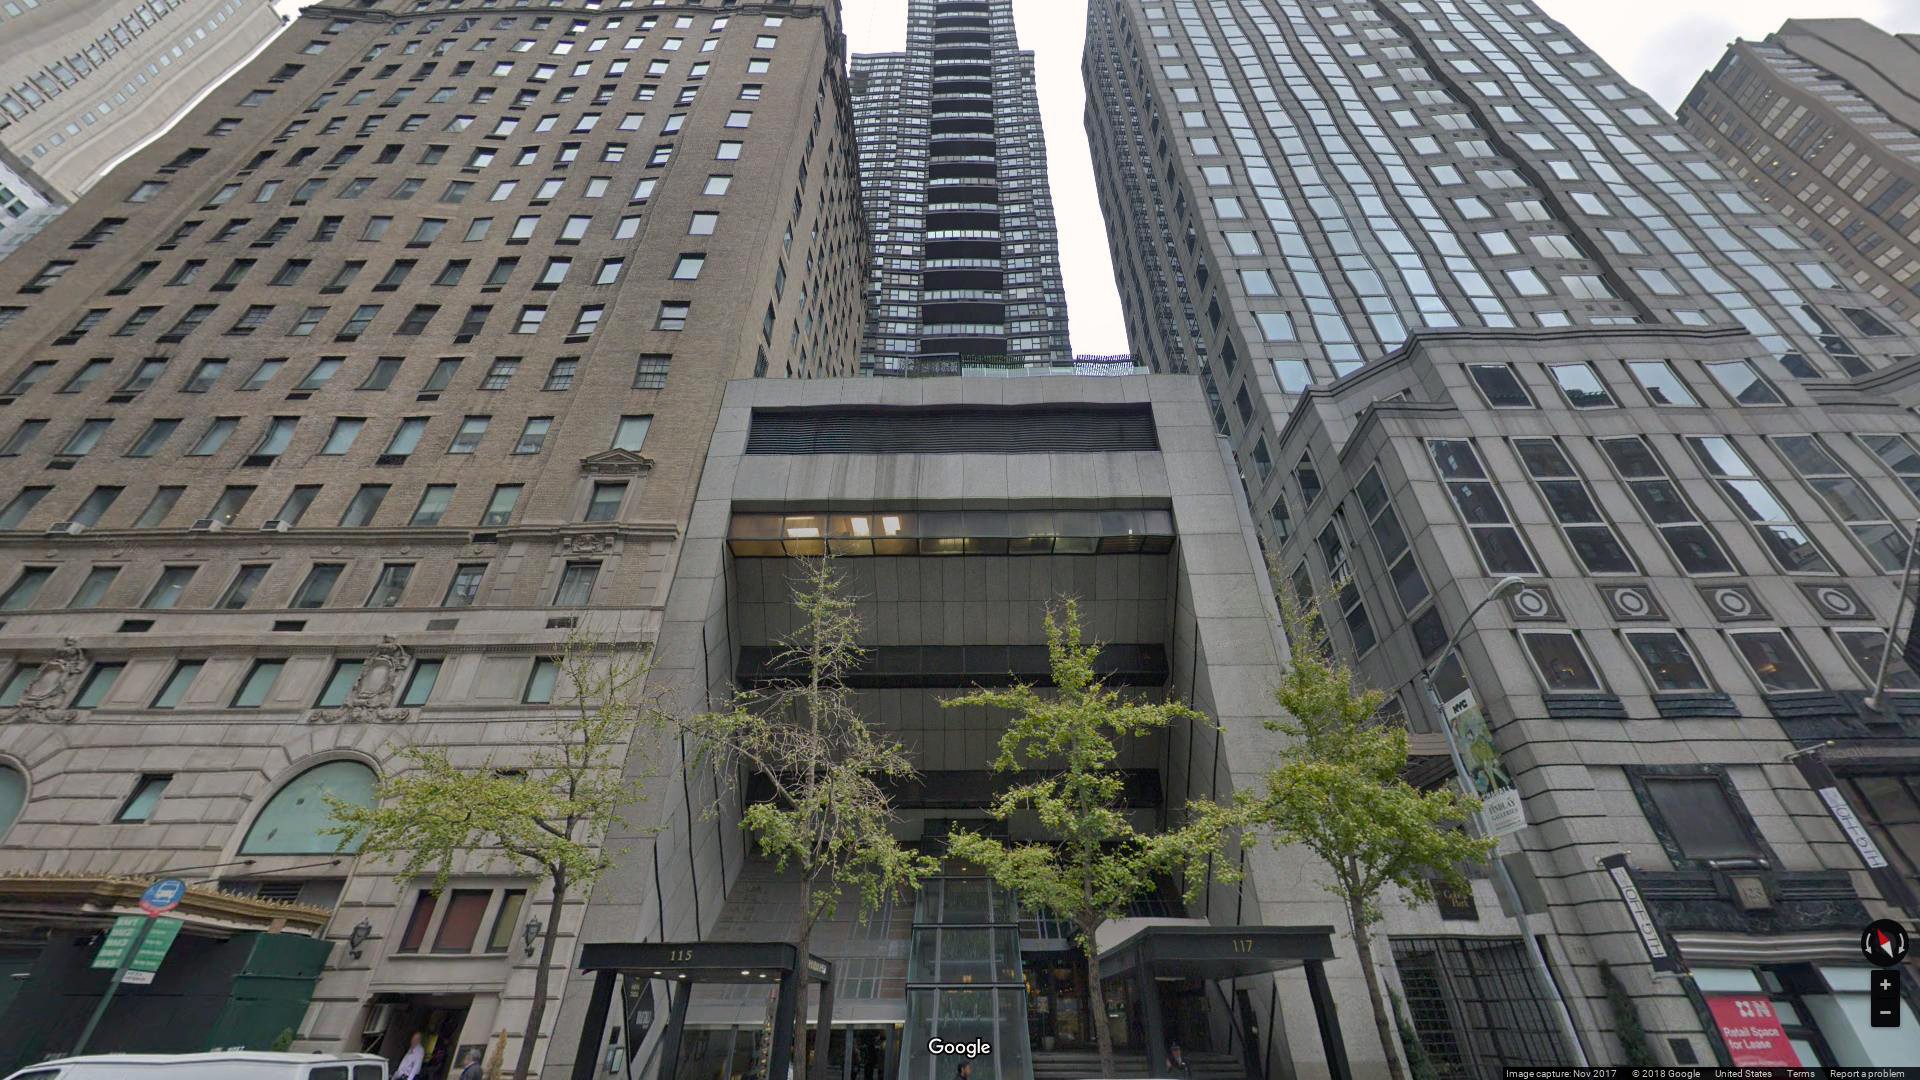 115 East 57th Street - Privately Owned Public Space (APOPS)